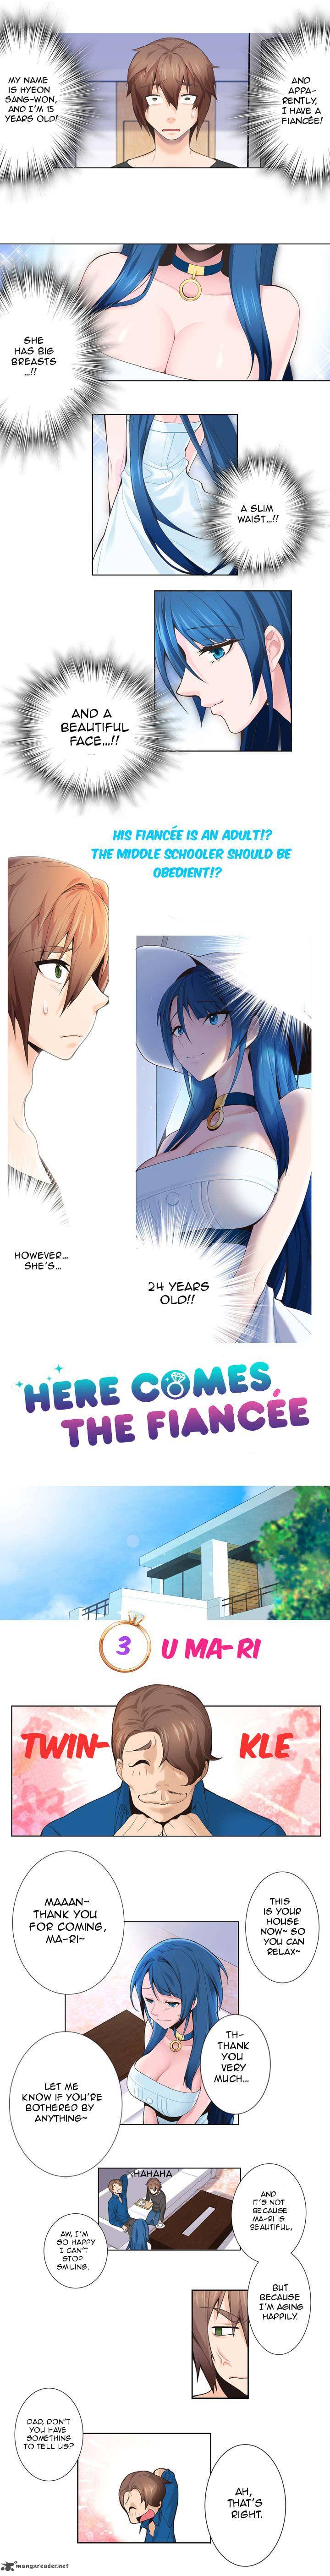 the_fiancee_is_here_3_3